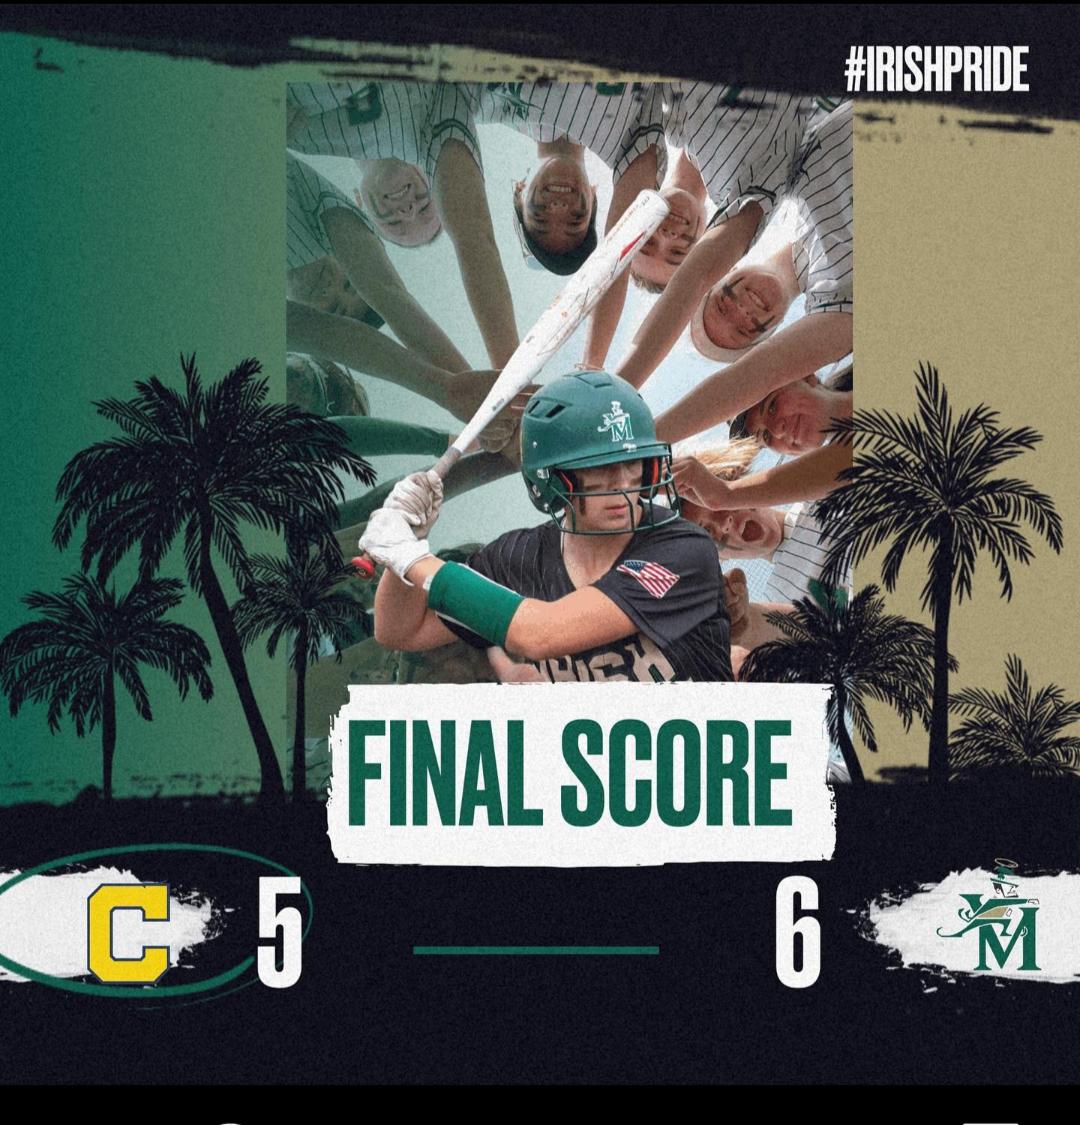 WOW. Your Irish Softball advances to the District finals with a 6-5 win over Copley. 
B. Campbell with a 2 out 2 RBI single to put the Irish ahead in the 7th and then unreal defense to end the game by Kujo and E Kim.  Team effort all the way around. 
#lovethisteam
@STVMAthletics